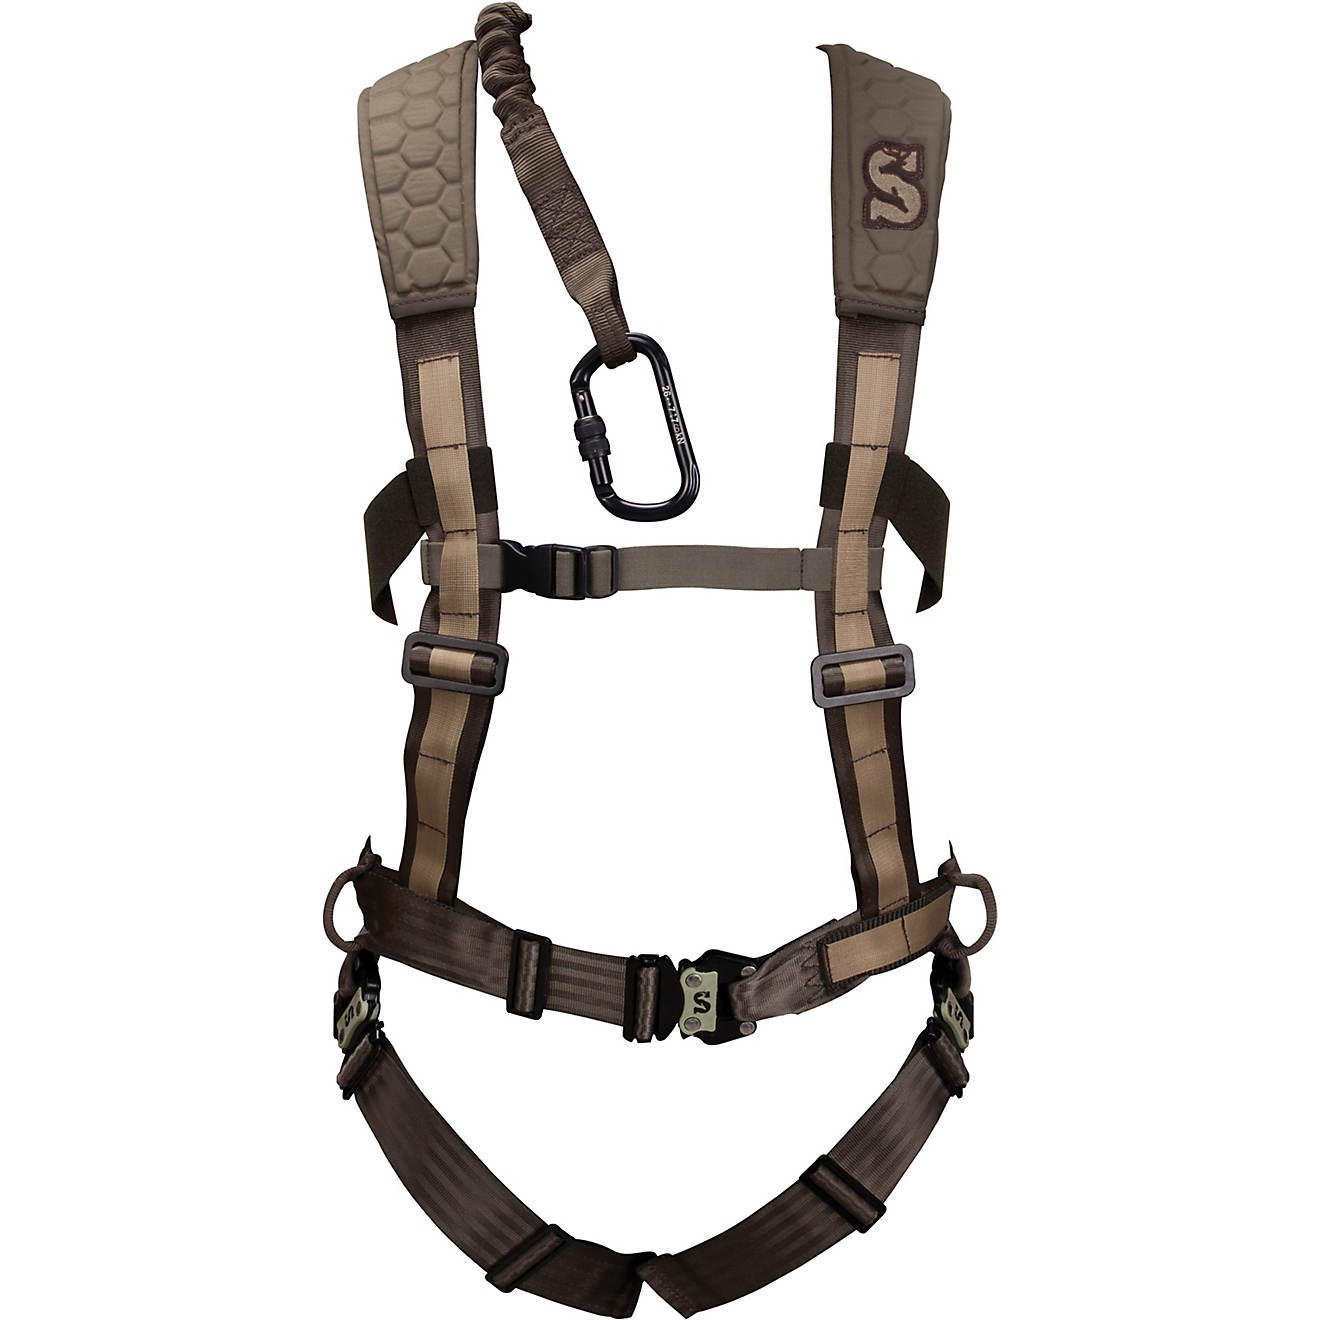 Details about   New Climbing Harnesss Safety Belt Adjustable Buckle for 1.75" Webbing 